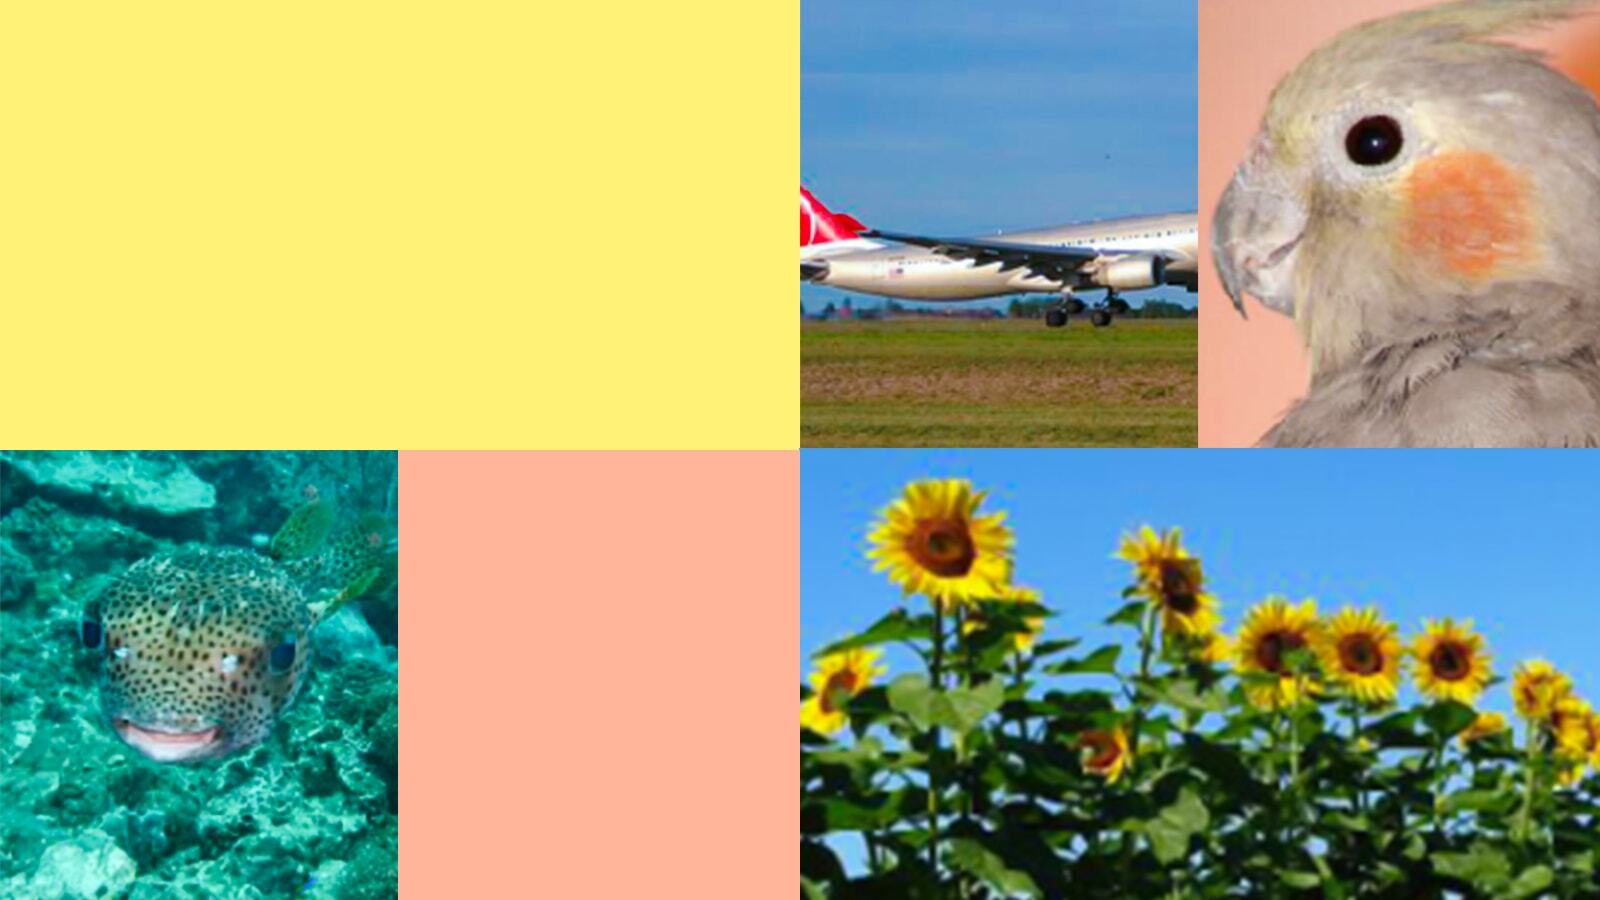 collage of pictures of: an airplane, a parrot, sunflowers, a fish